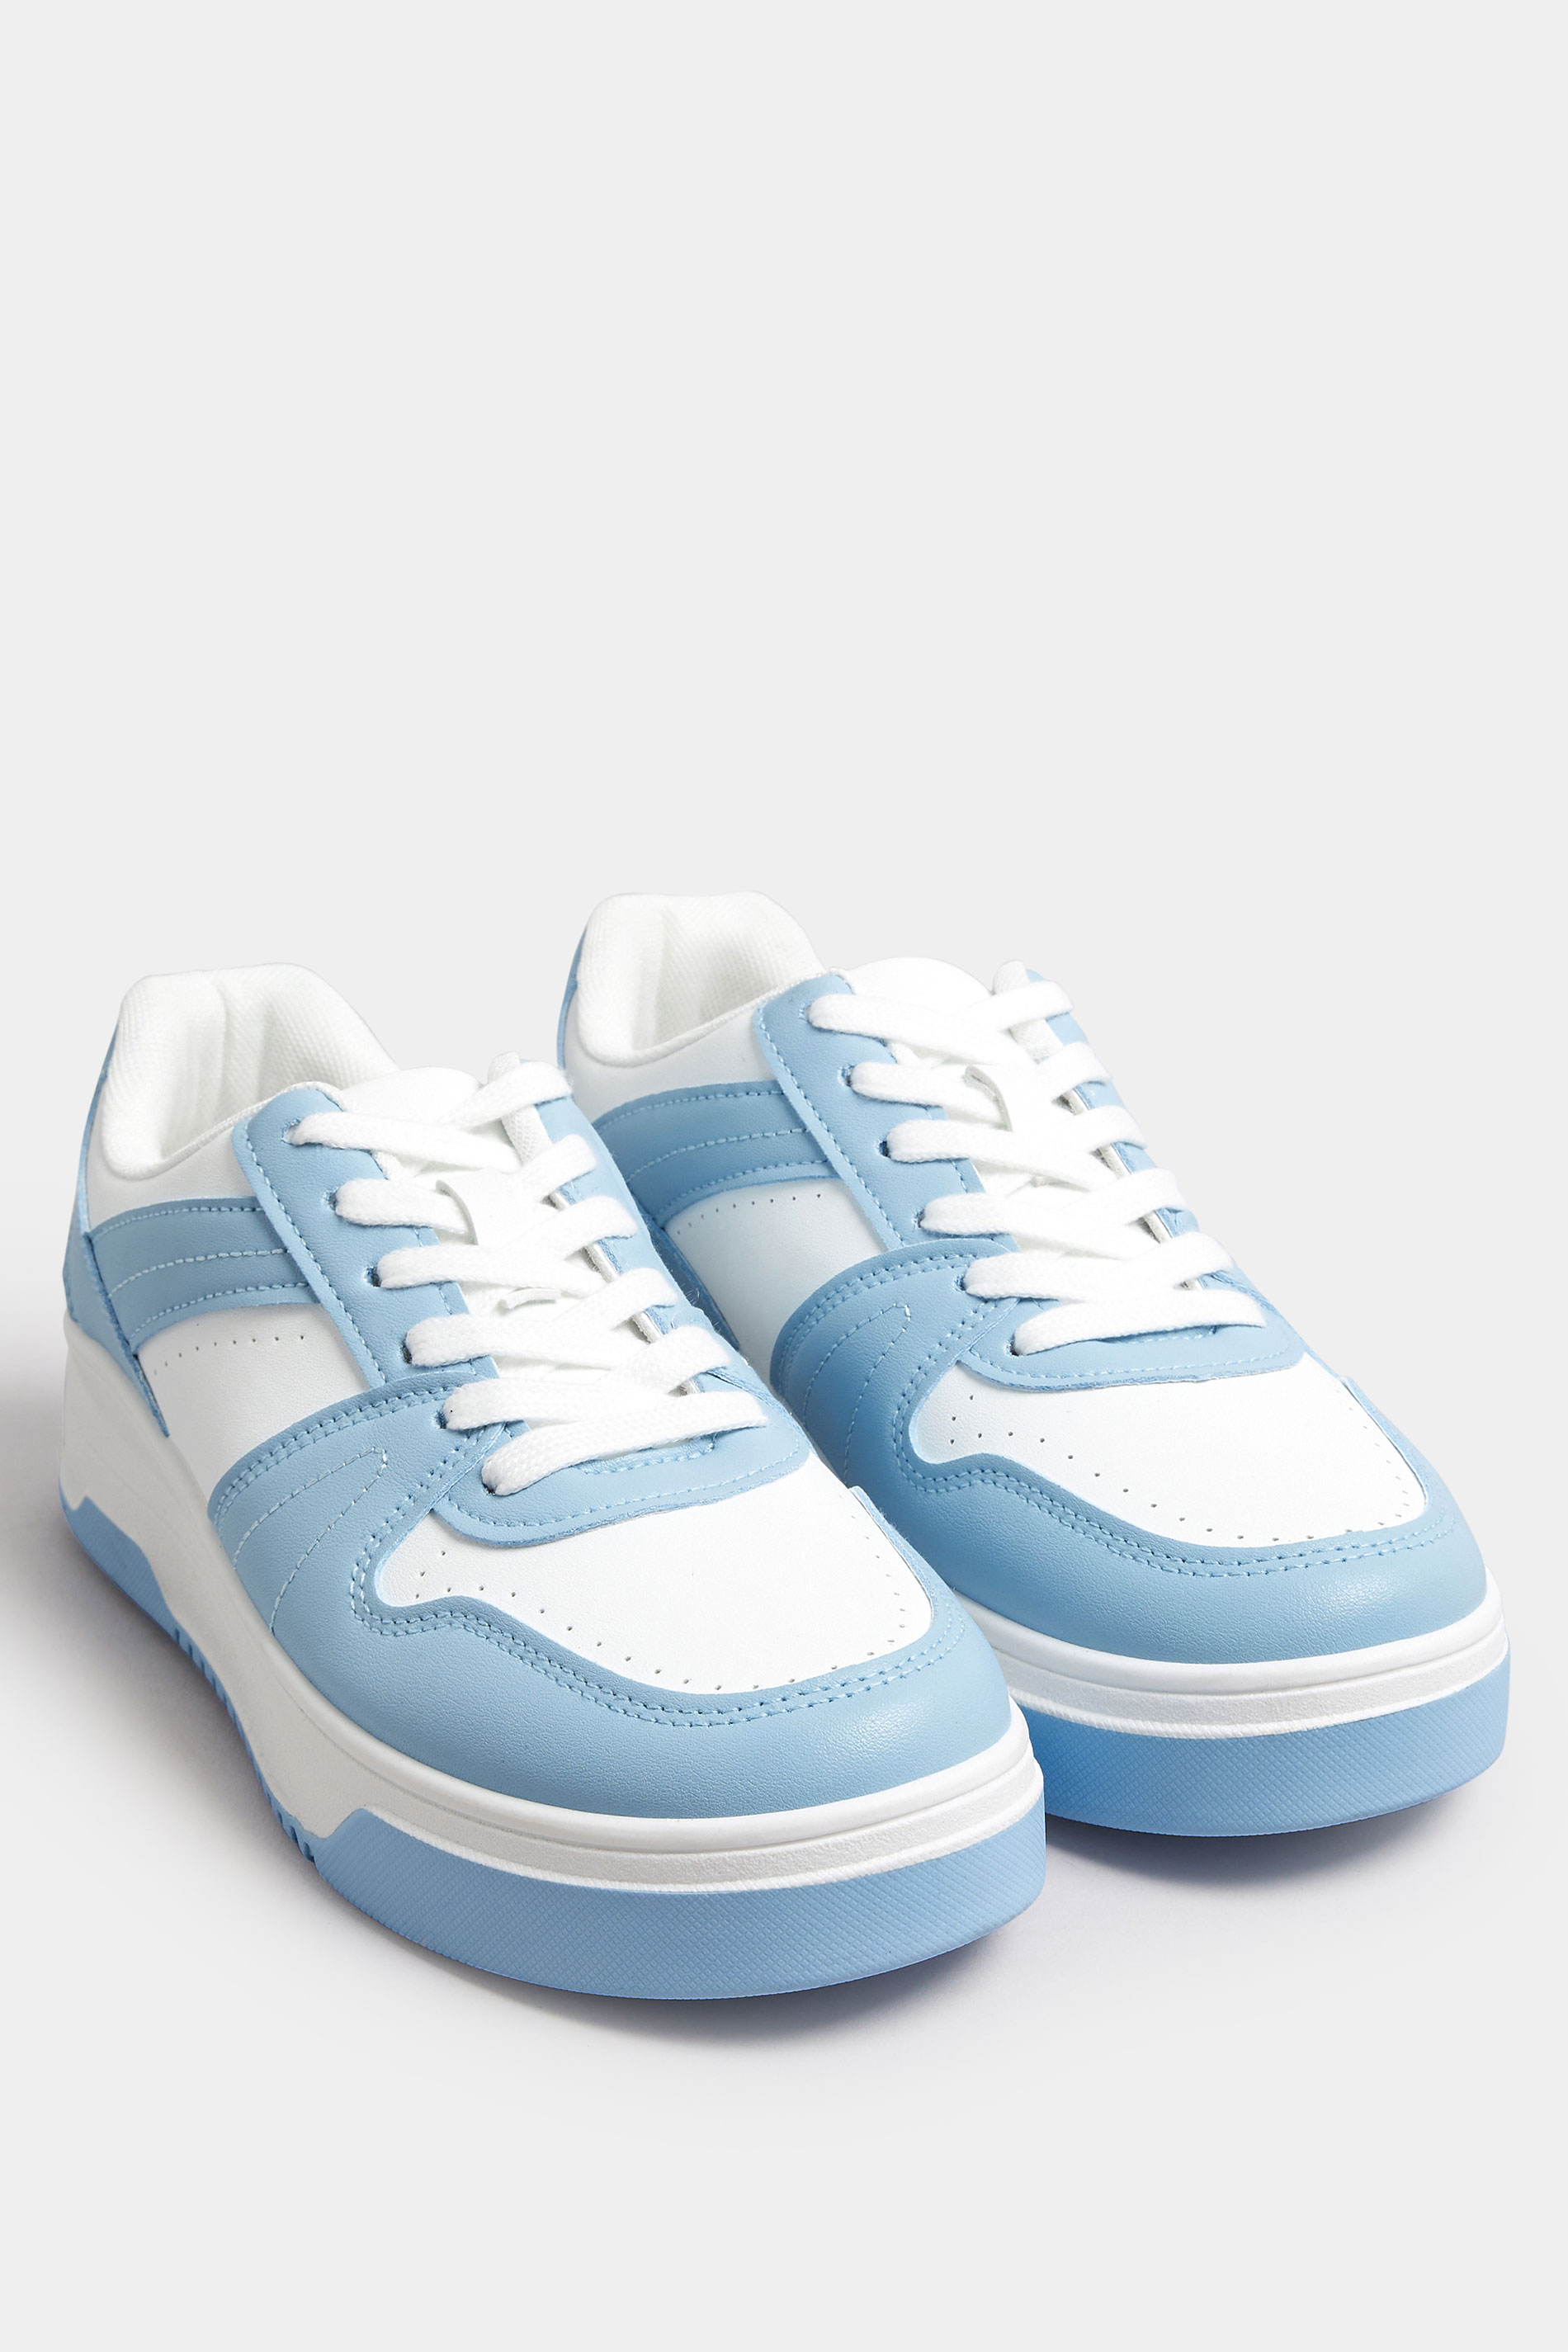 Blue & White Chunky Trainers In Extra Wide EEE Fit | Yours Clothing 2